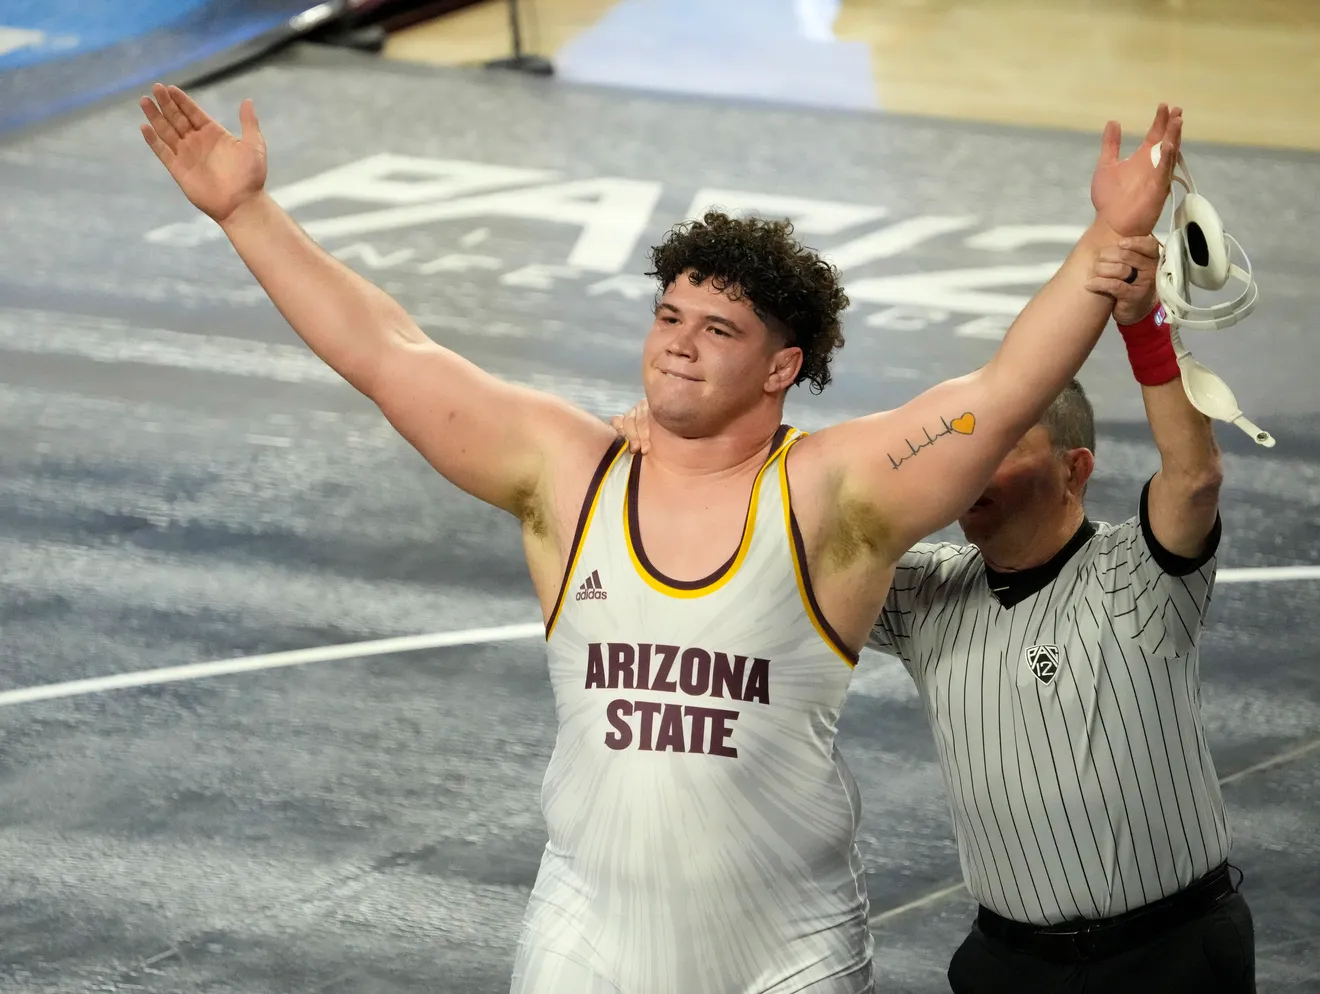 Arizona State athletes Cohlton Schultz, Case Hatch get WWE name, image, likeness contracts